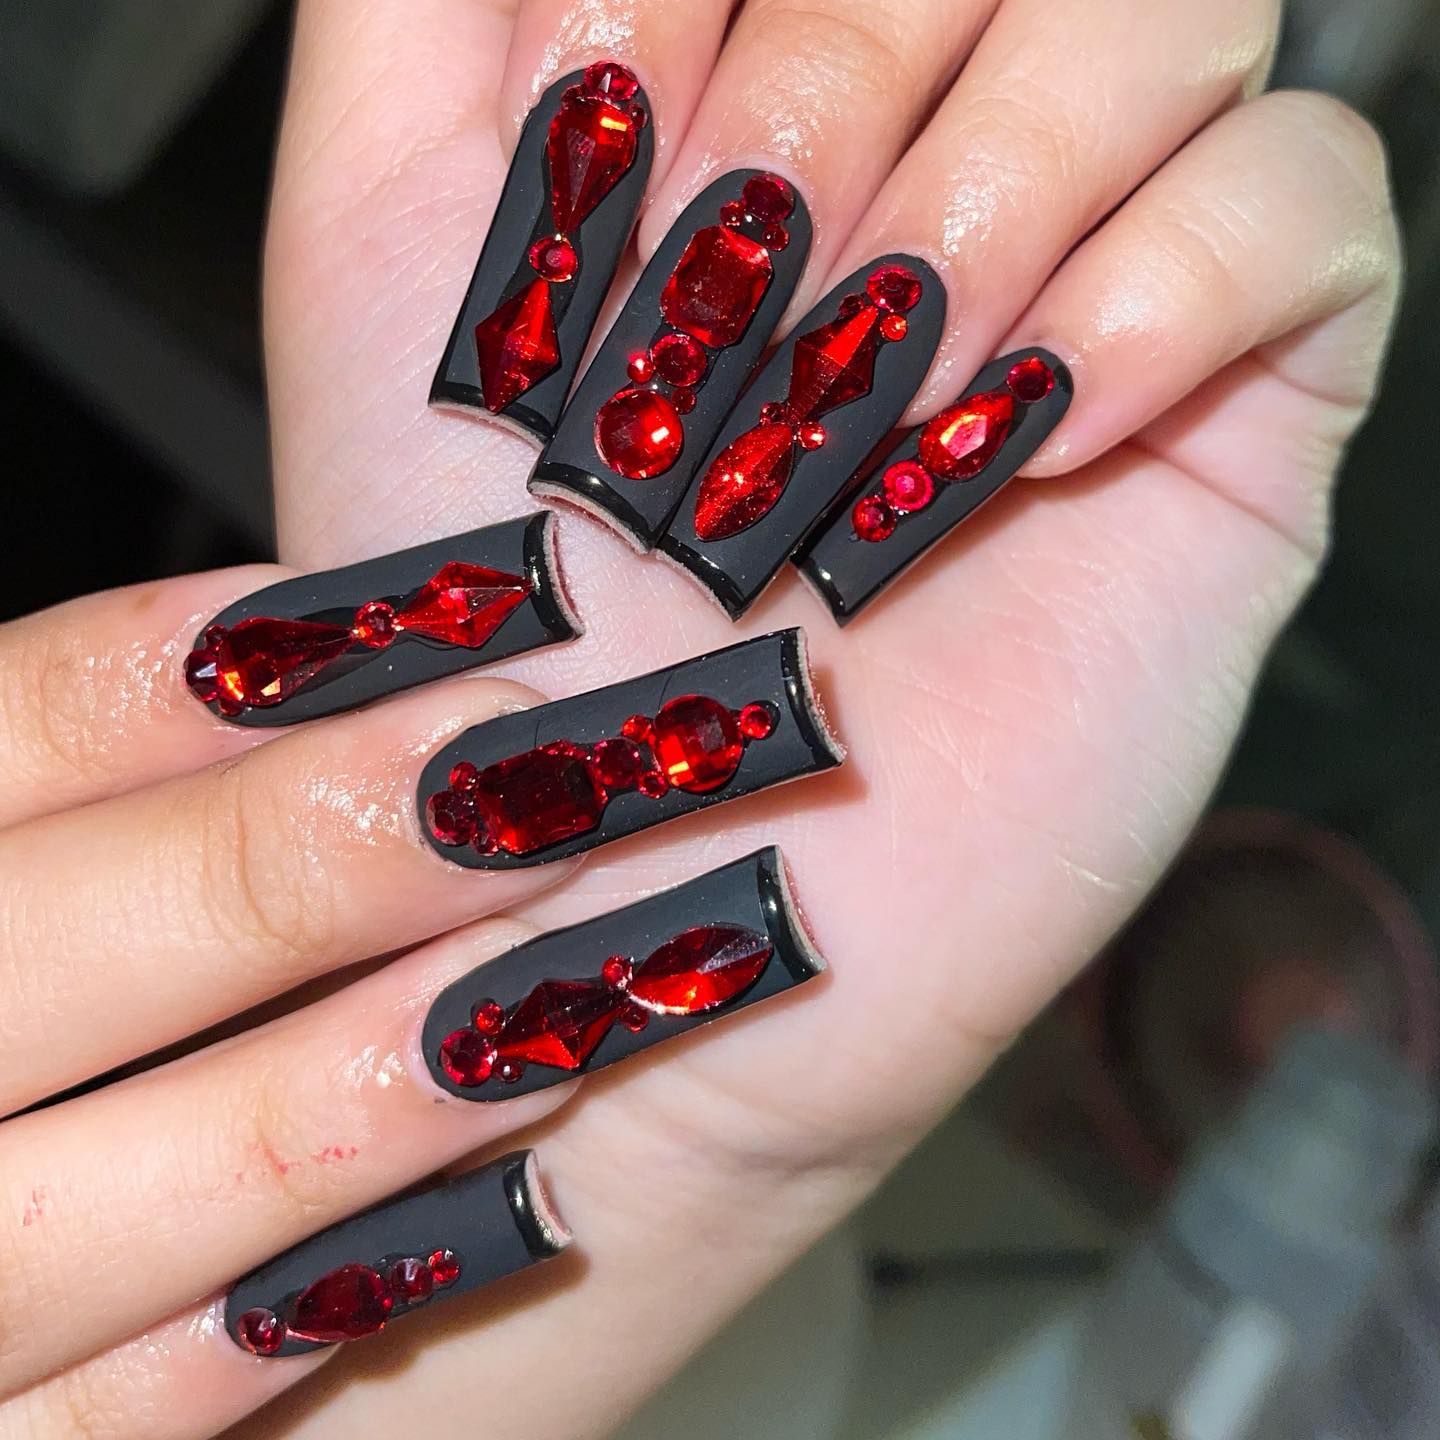 Long black acrylic nails are taken to a whole different level with red color. This time it is not the red nail polish but red stones that offer a great look for your black nails. Let's get them to stand out.